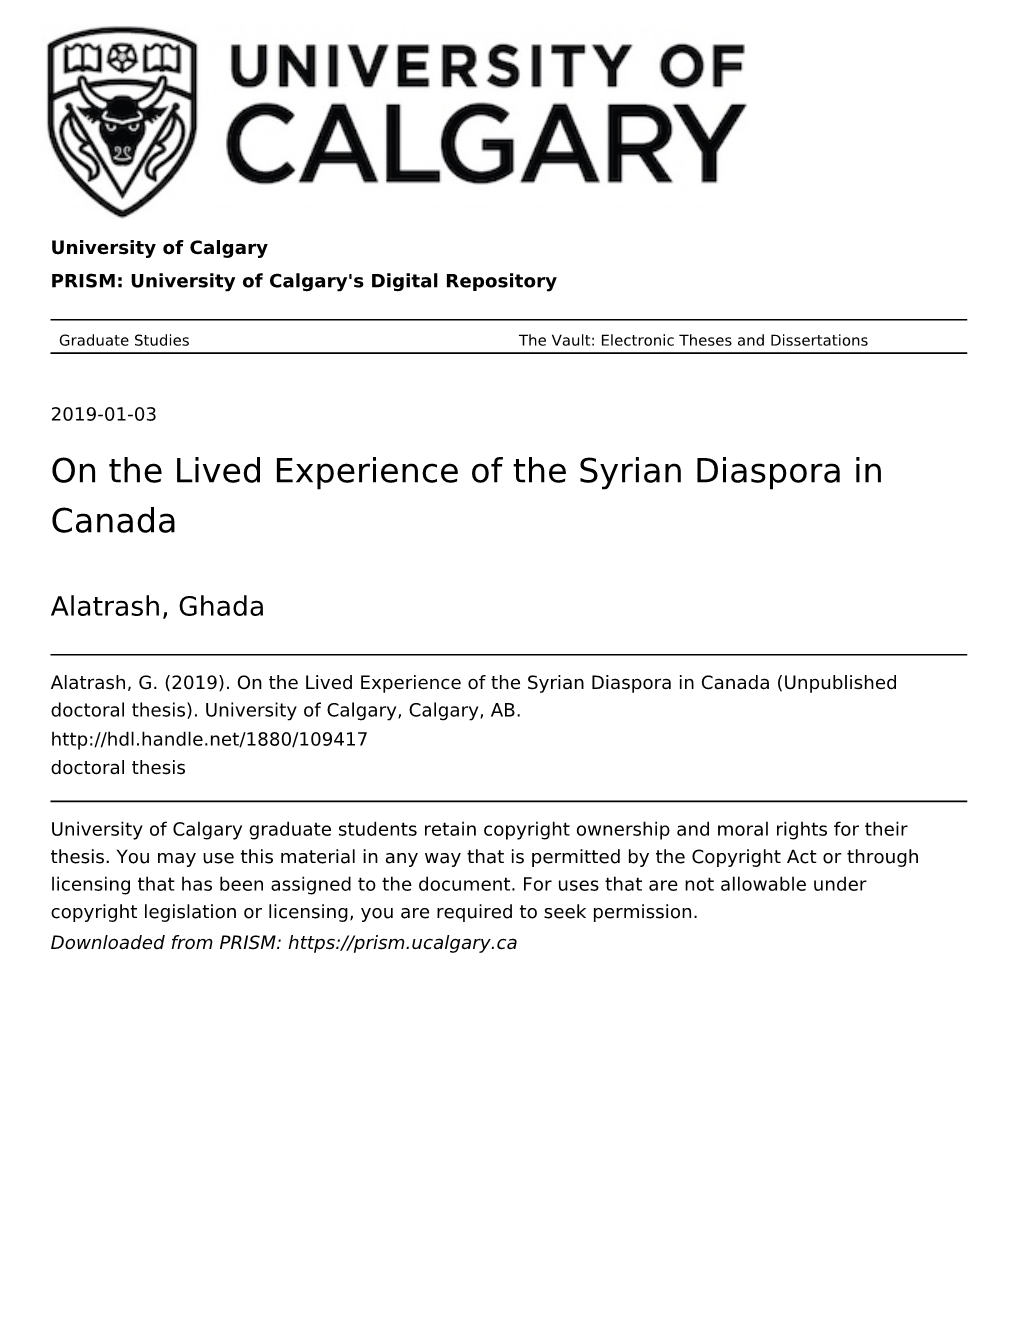 On the Lived Experience of the Syrian Diaspora in Canada